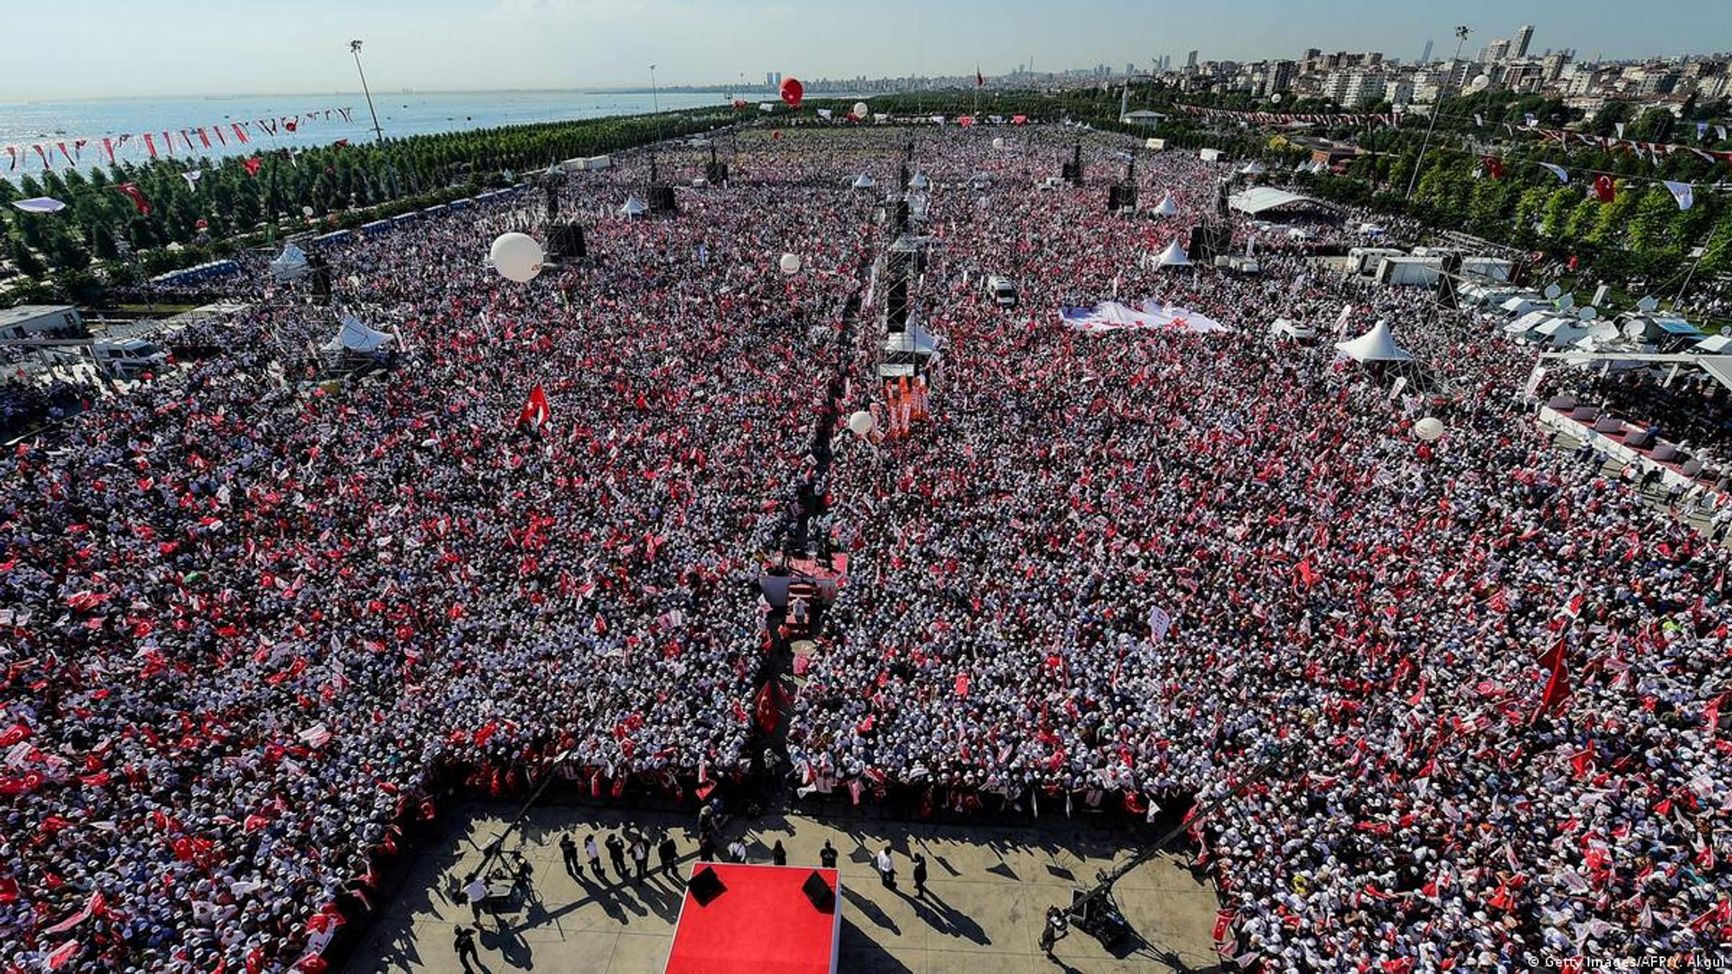 The March for Justice organized by Kilicdaroglu in 2017